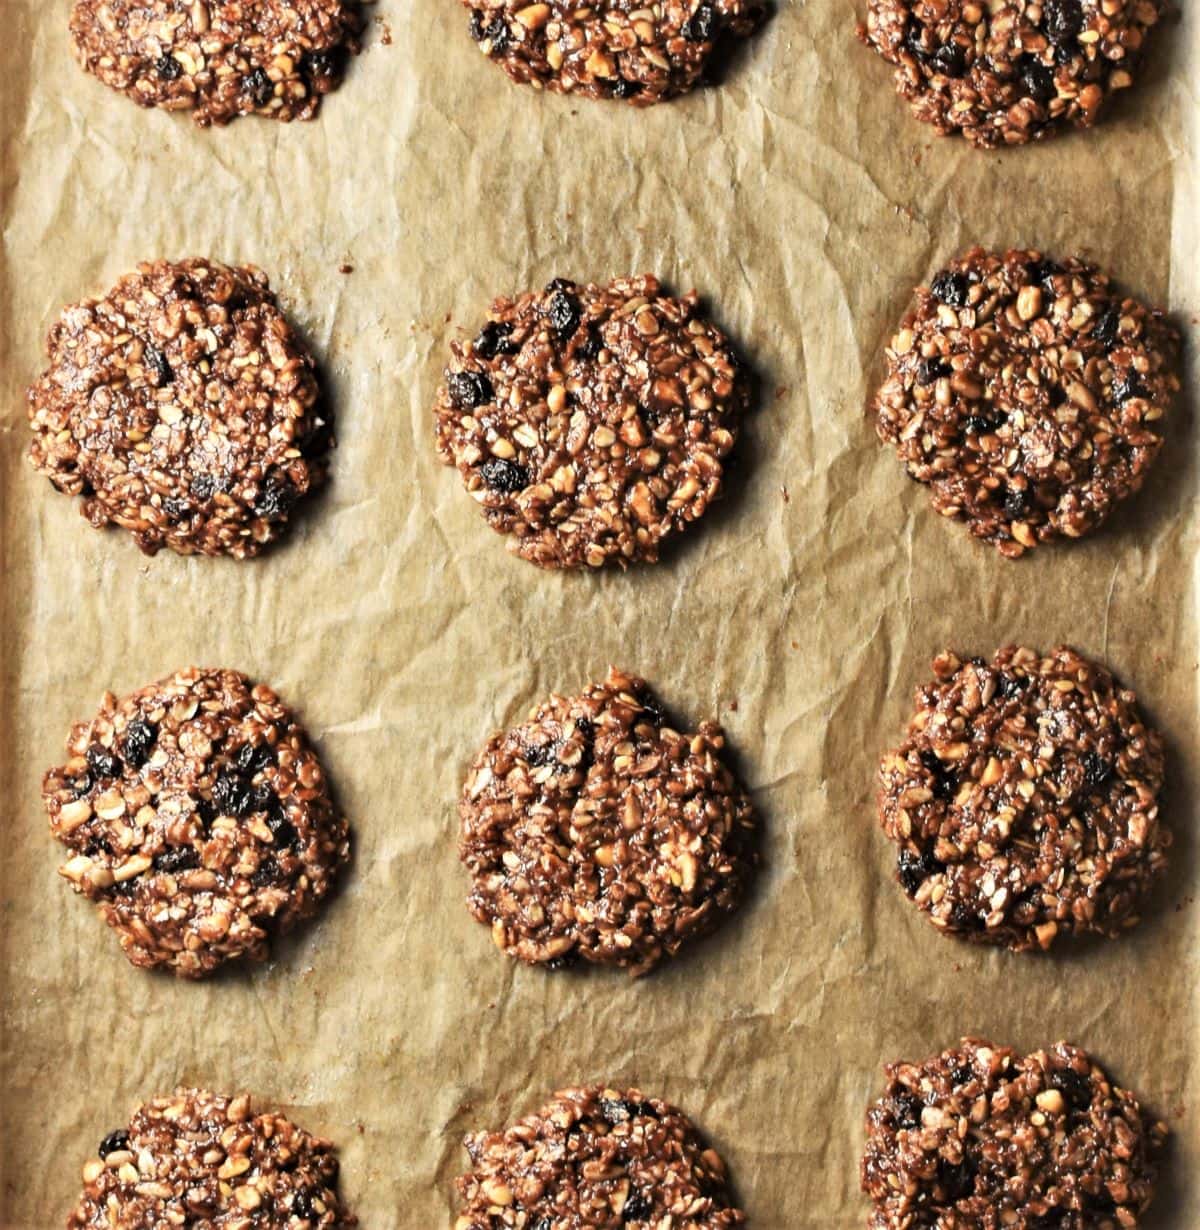 Chocolate oatmeal cookies on top of baking paper.